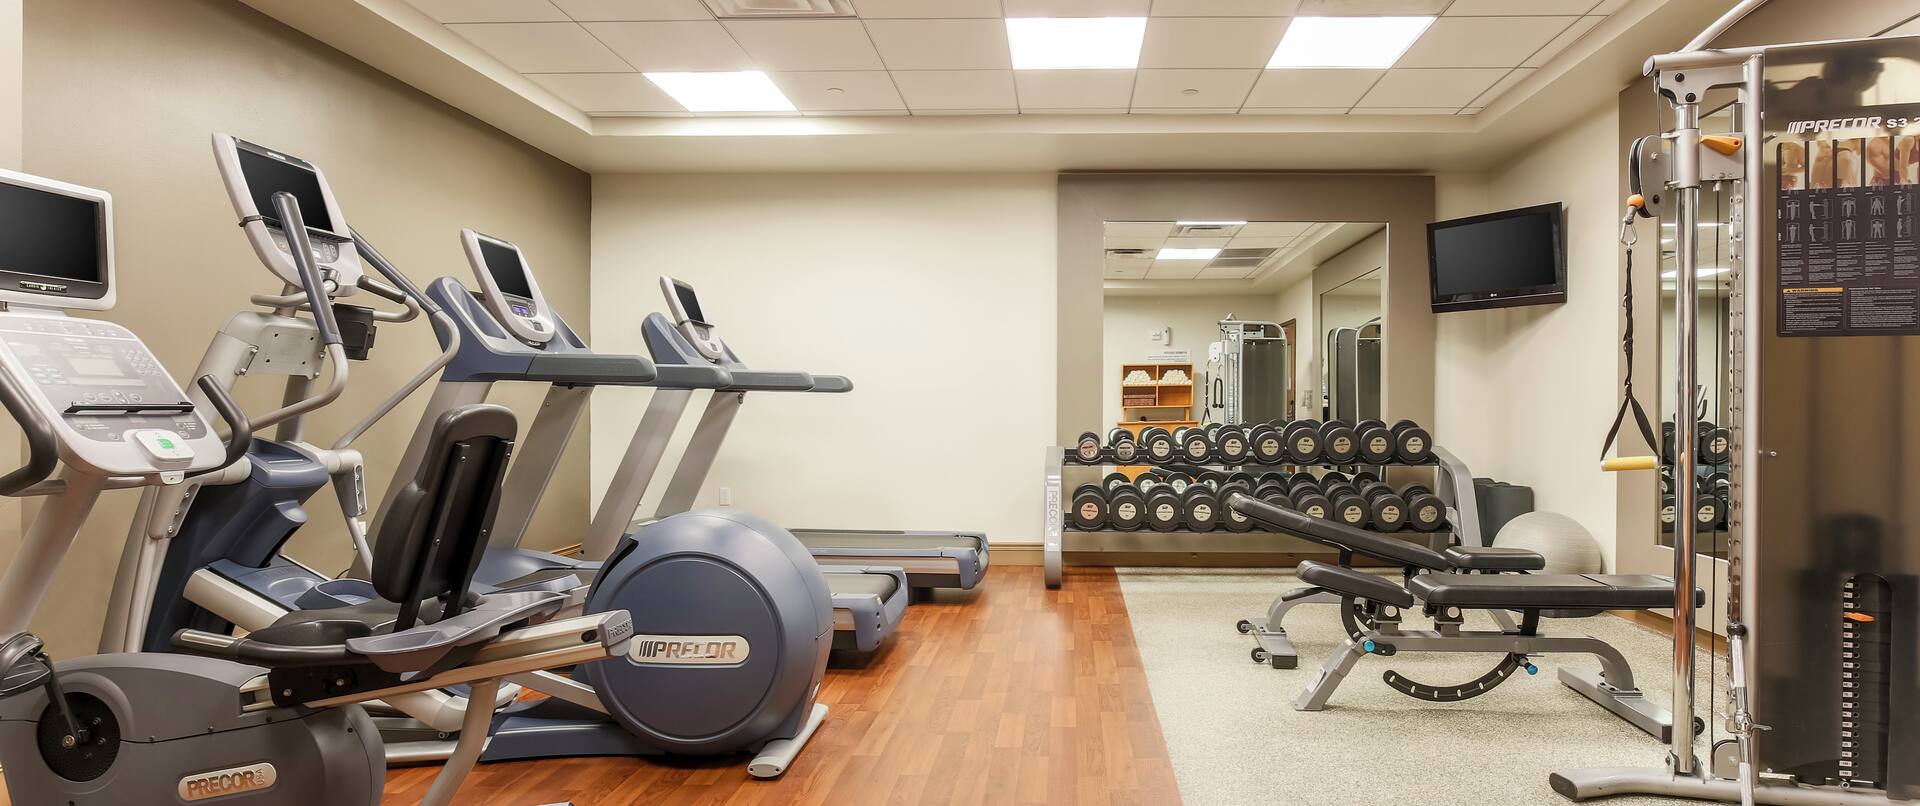 Spacious modern gym with cardio machines and free weights